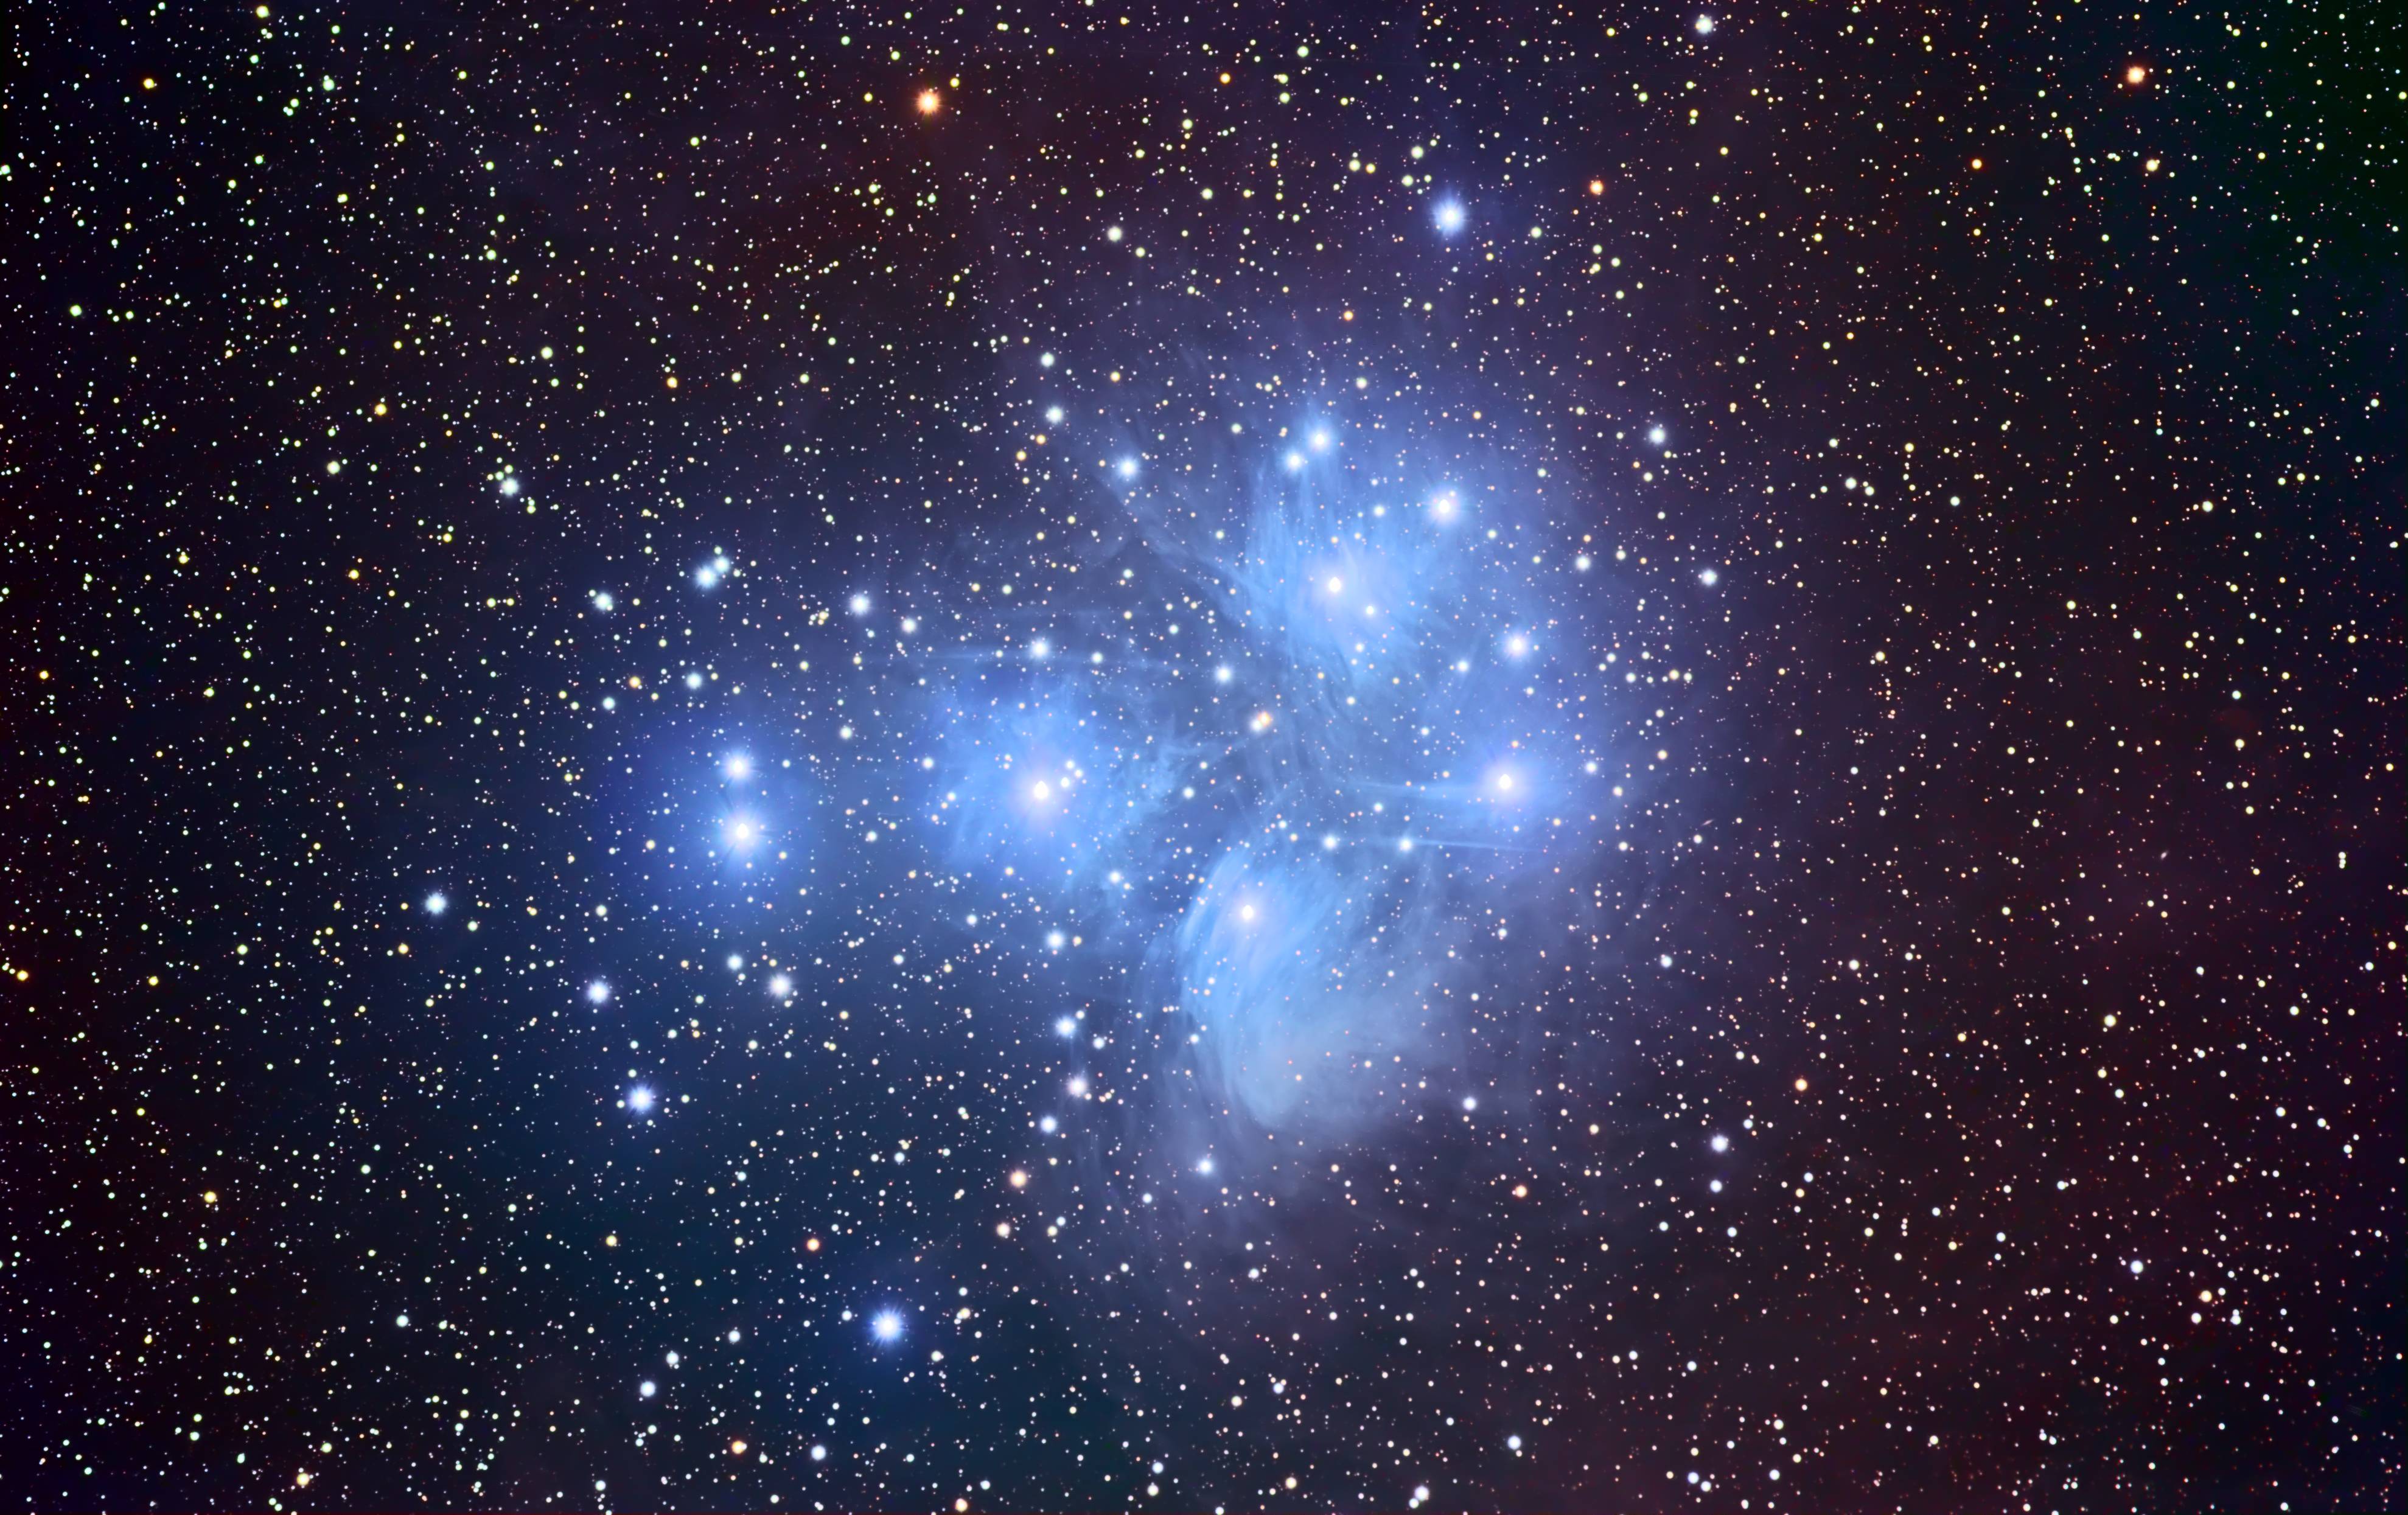 Pleiades Wallpaper 23435 Image. largepict